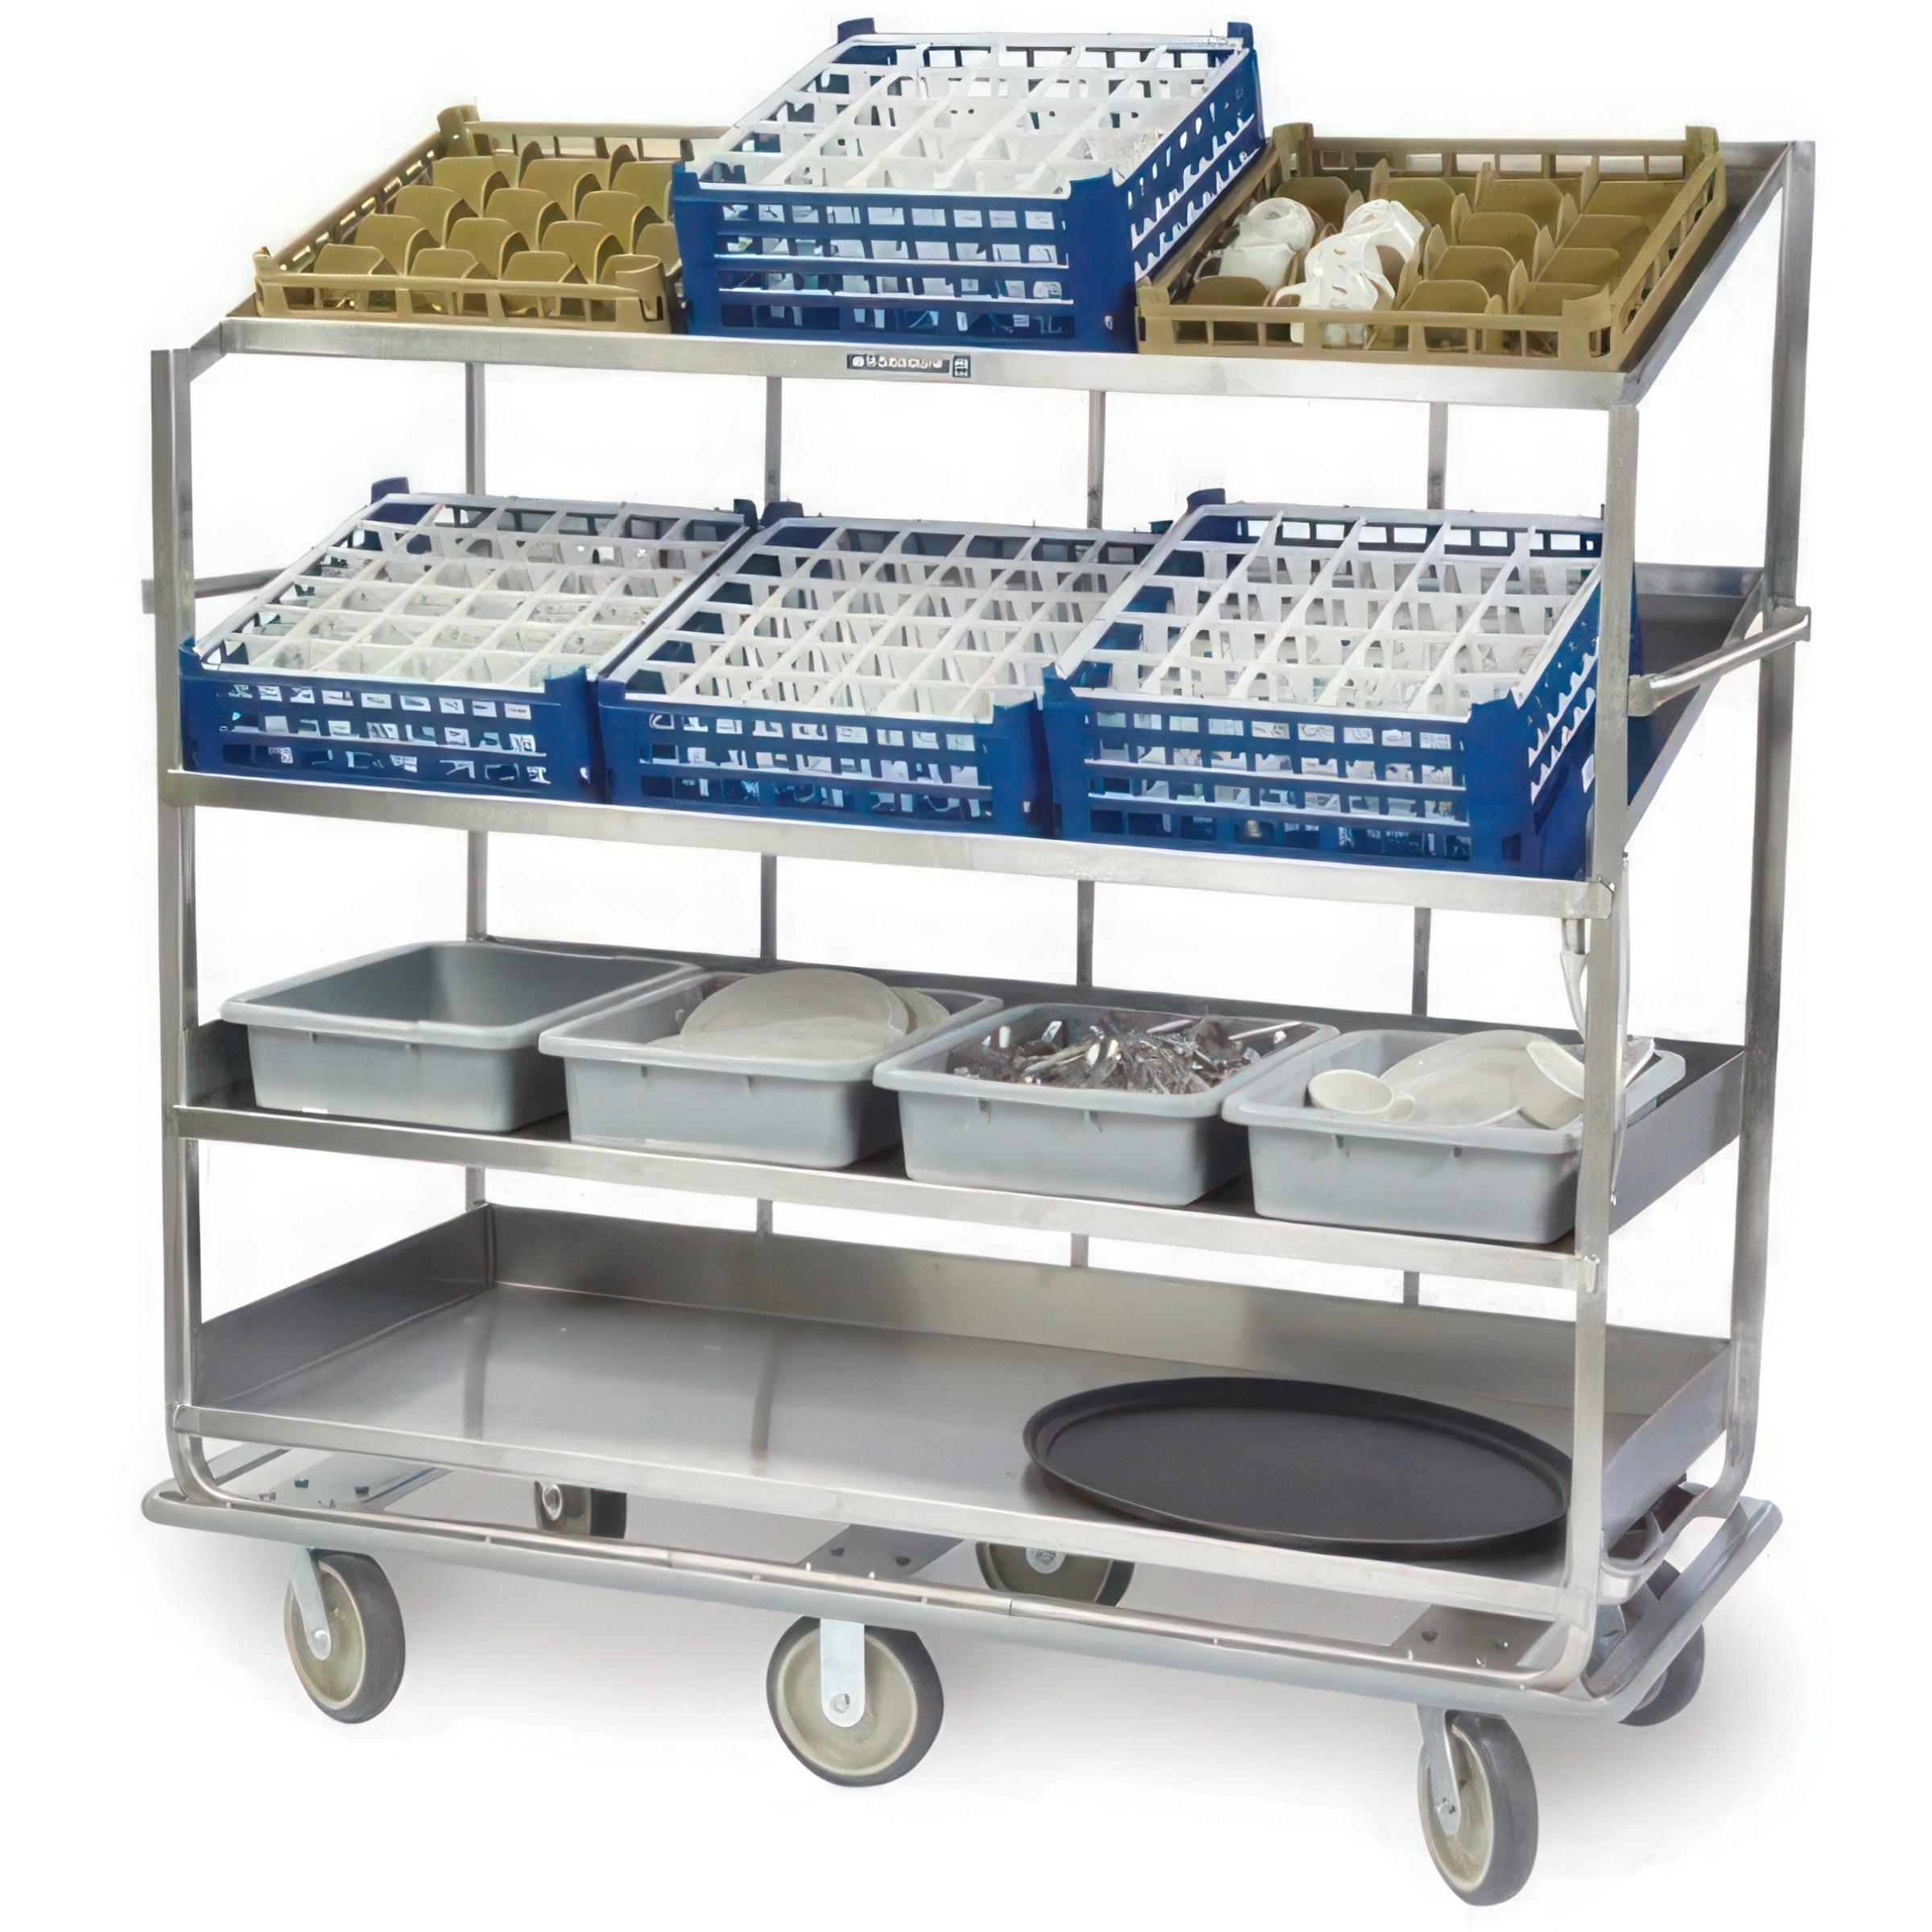 Dish/Plate Racks, Experts in Innovative Food Merchandising Solutions